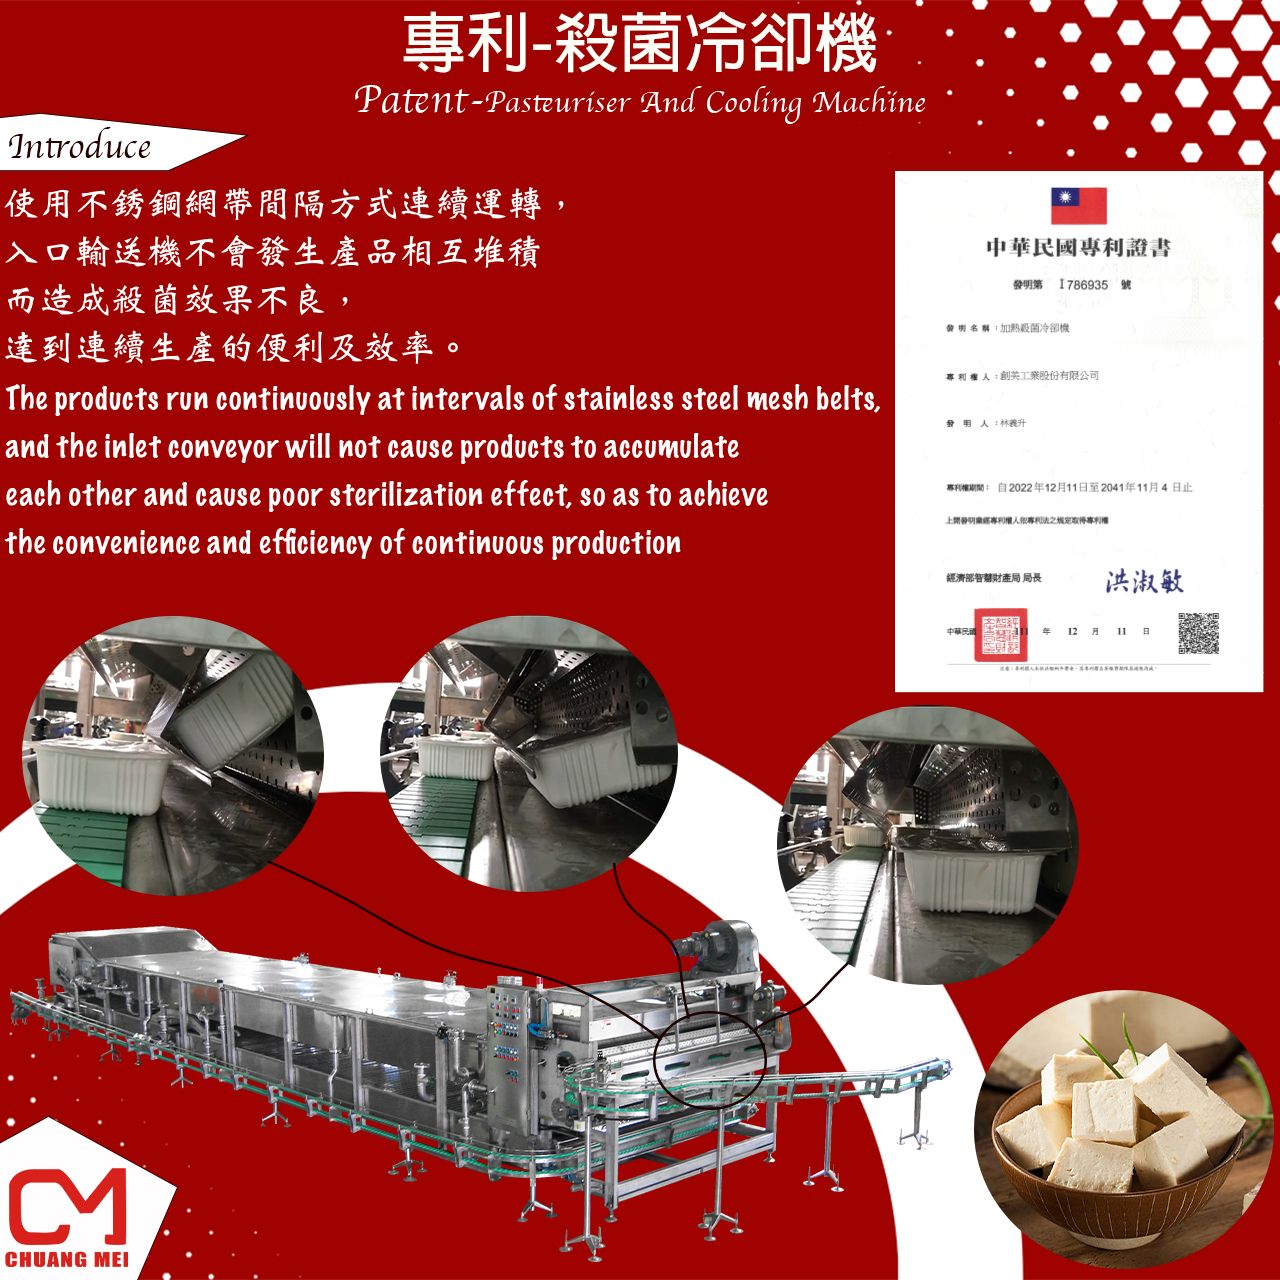 The pasteuriser and cooling machine designed and developed by Chuang Mei .